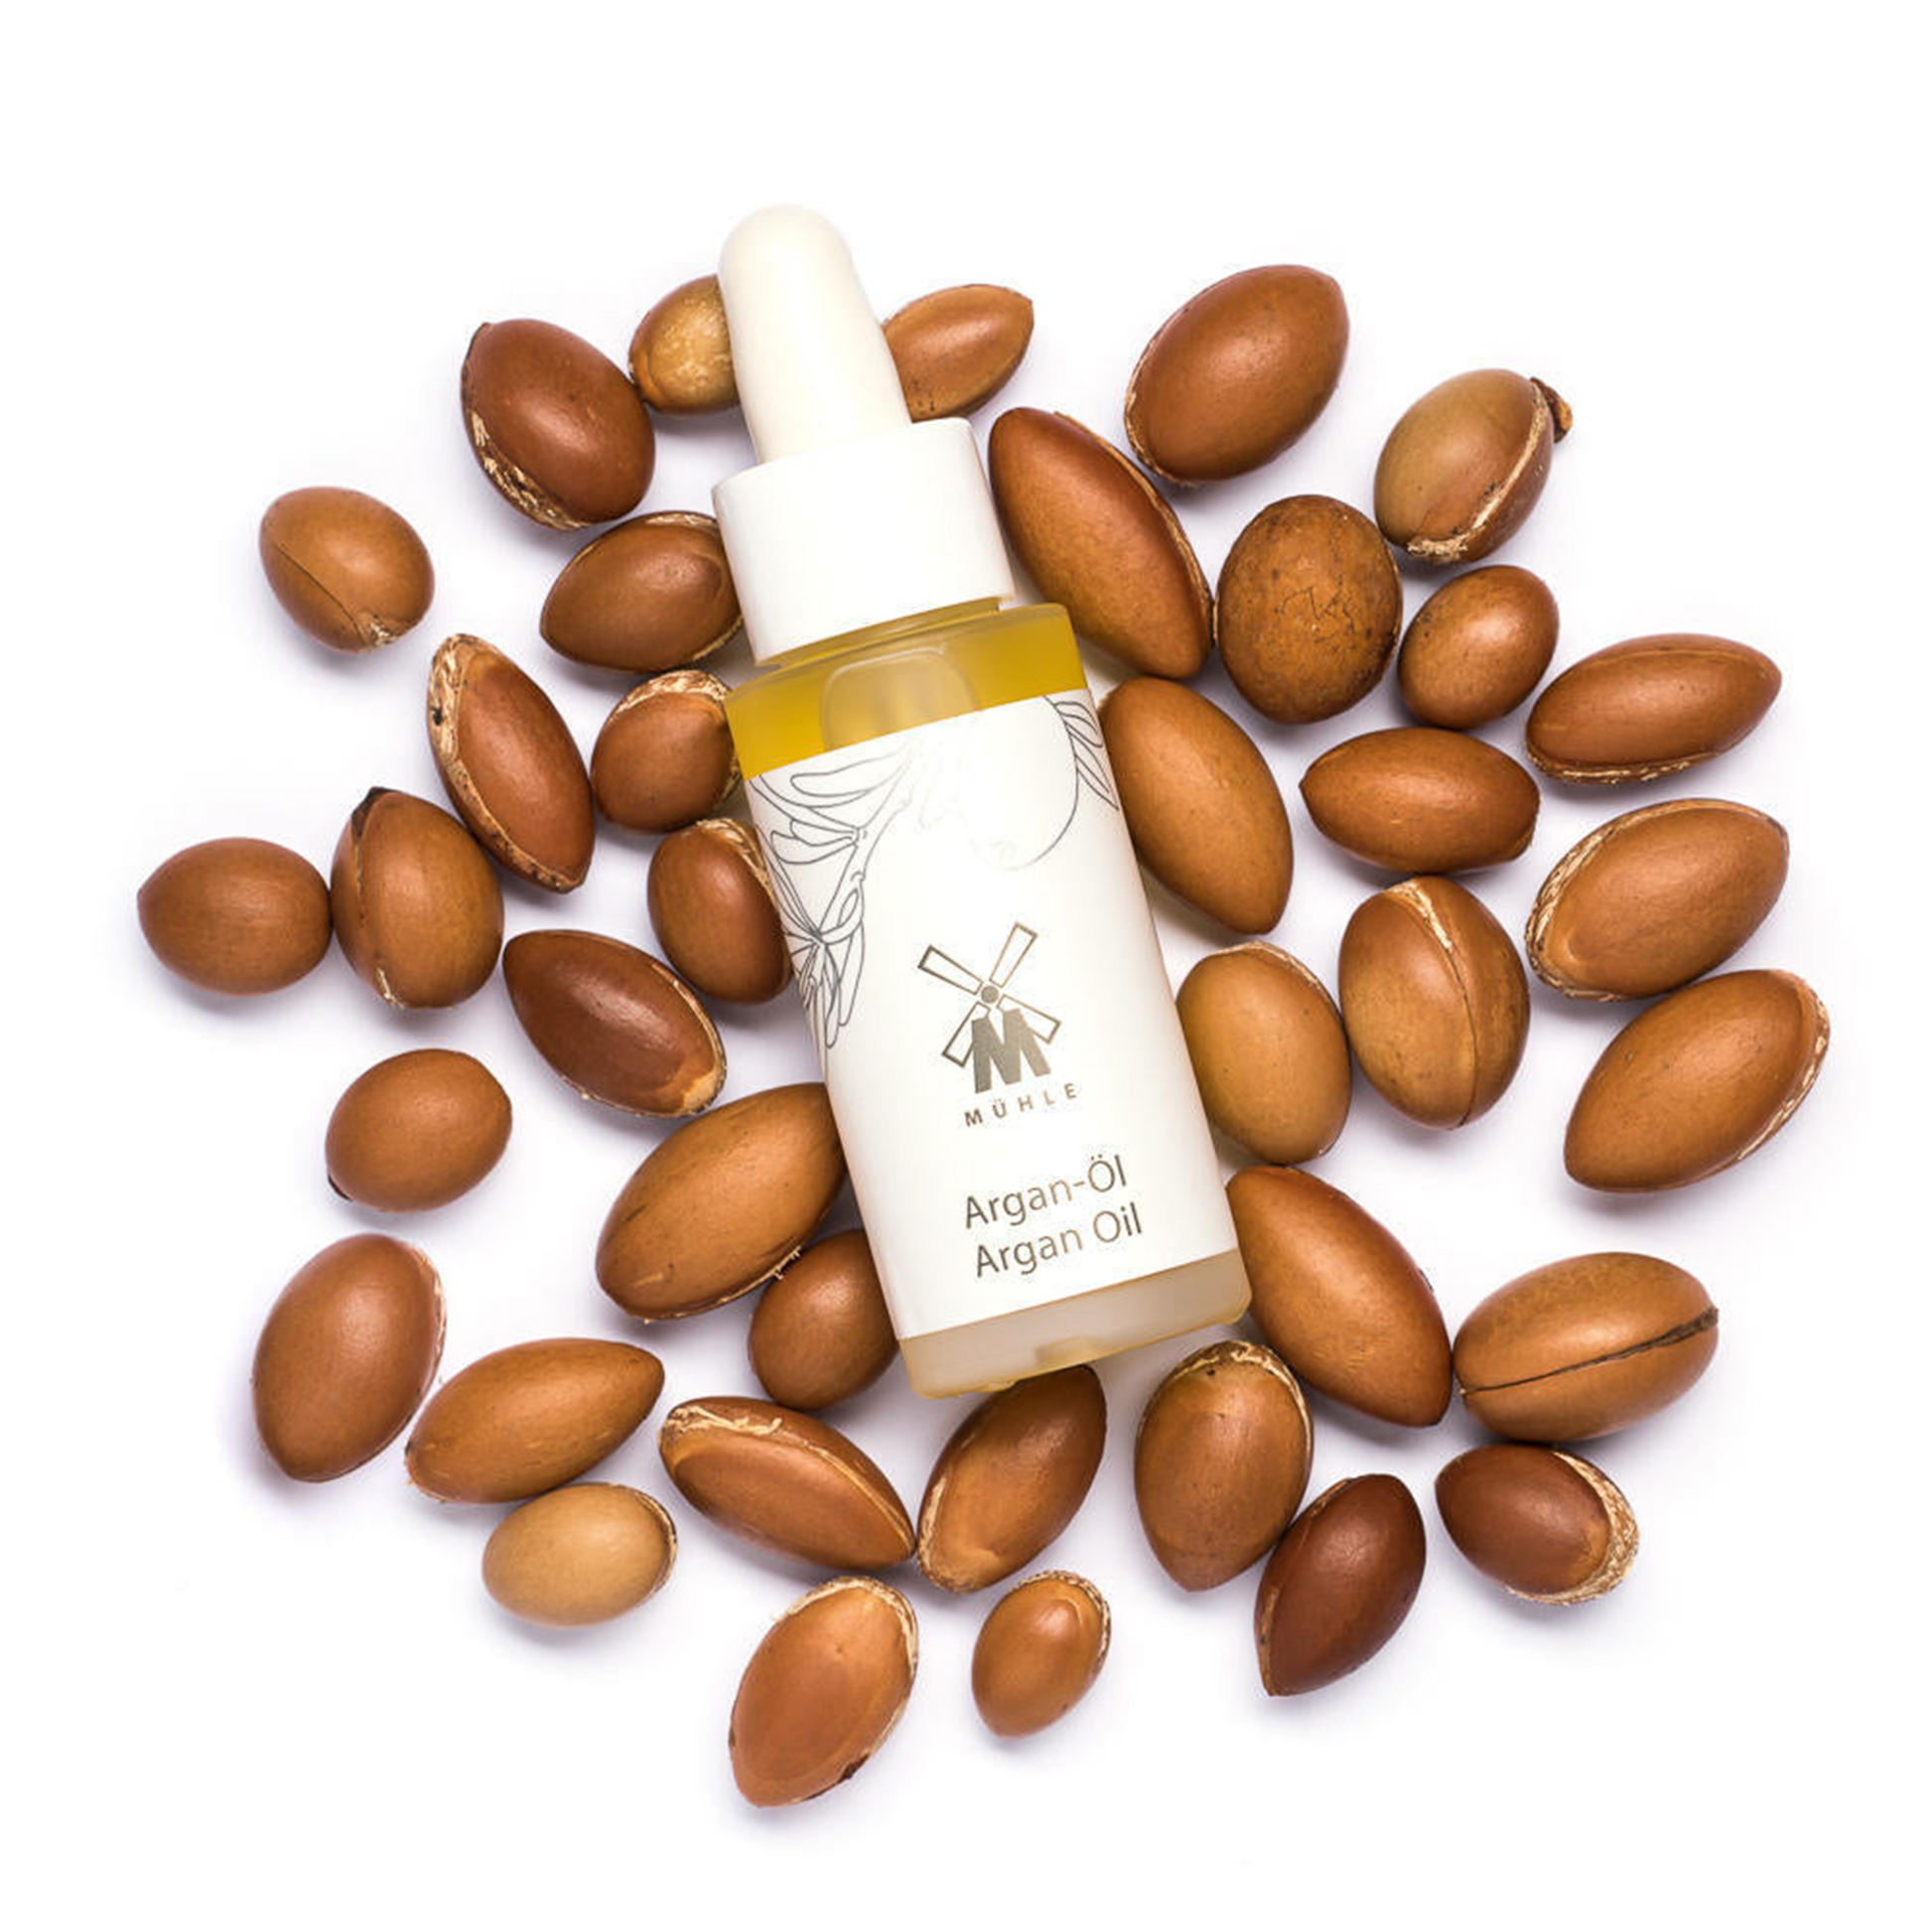 MUHLE Organic Argan Oil: Particularly rich in vitamin E, antioxidants and radical scavengers; it is considered an effective force for anti-ageing that regenerates and moisturises the skin.  Only raw herbal materials obtained from organic farming or organic wild harvesting are used in the MÜHLE ORGANIC range, with each product being certified with the BDIH.  Fresh, floral and green, MÜHLE ORGANIC range is gently fragranced with notes of lime, mint and vetiver.